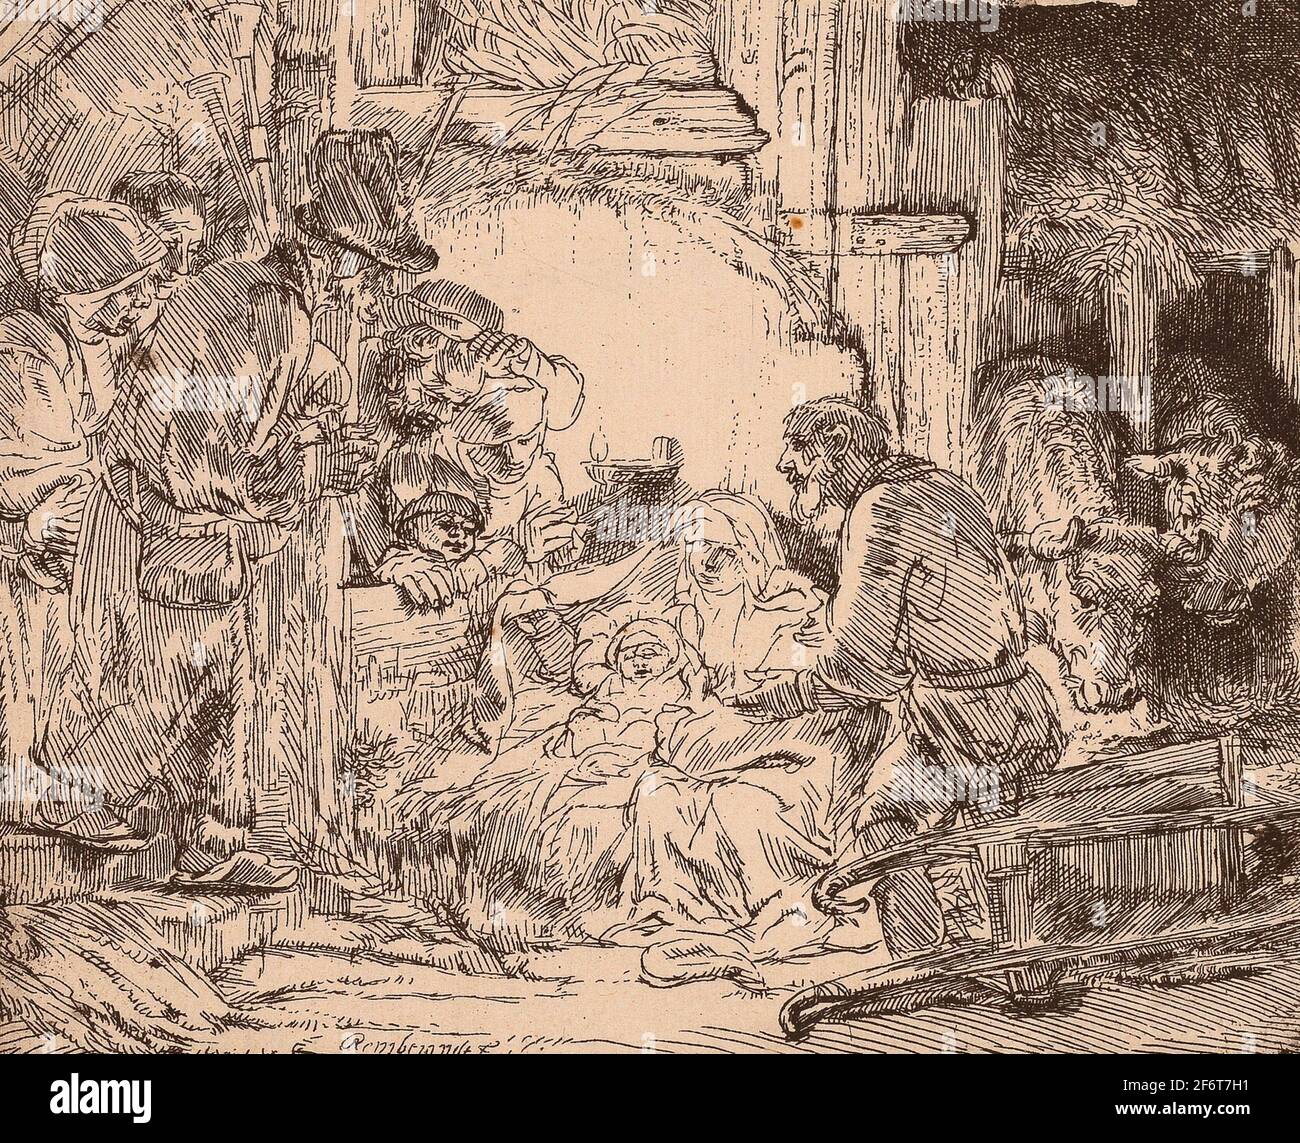 Author: Rembrandt Harmenszoon van Rijn. The Adoration of the Shepherds: With the Lamp - c. 1654 - Rembrandt van Rijn Dutch, 1606-1669. Etching on Stock Photo